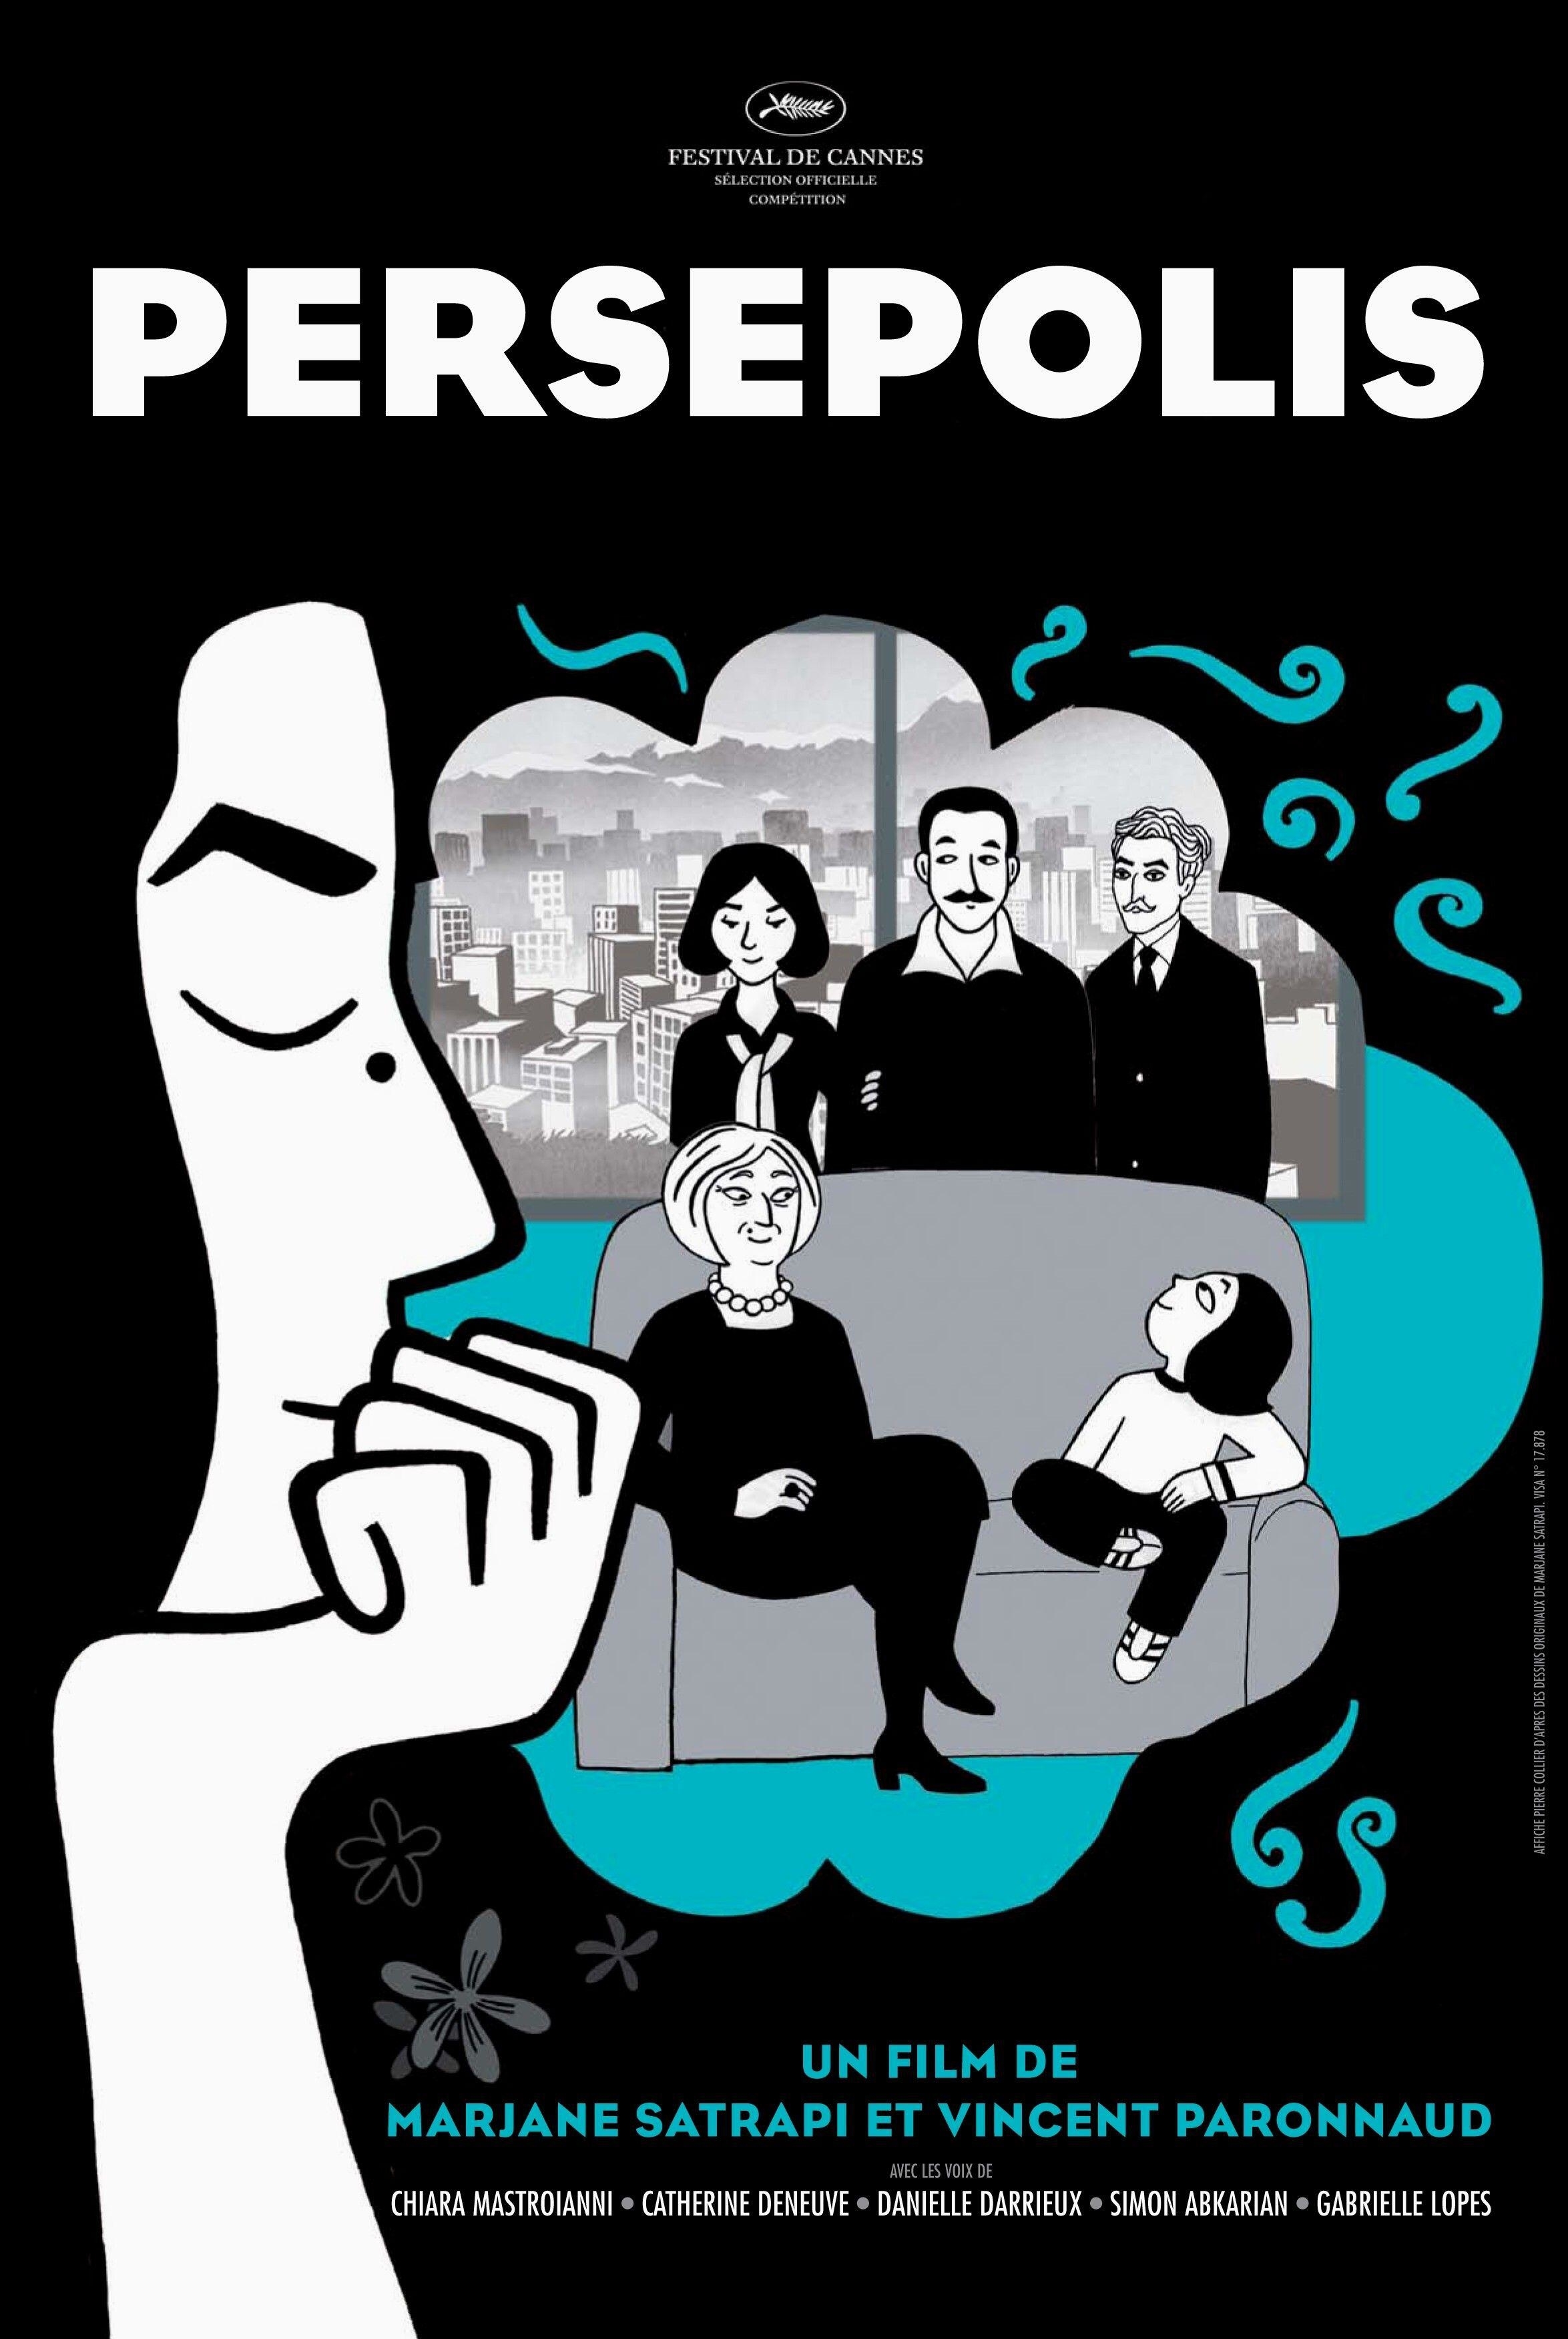 Poster image for the animated film Persepolis, with the main characters face in profile looking at her family sitting within a dream bubble.